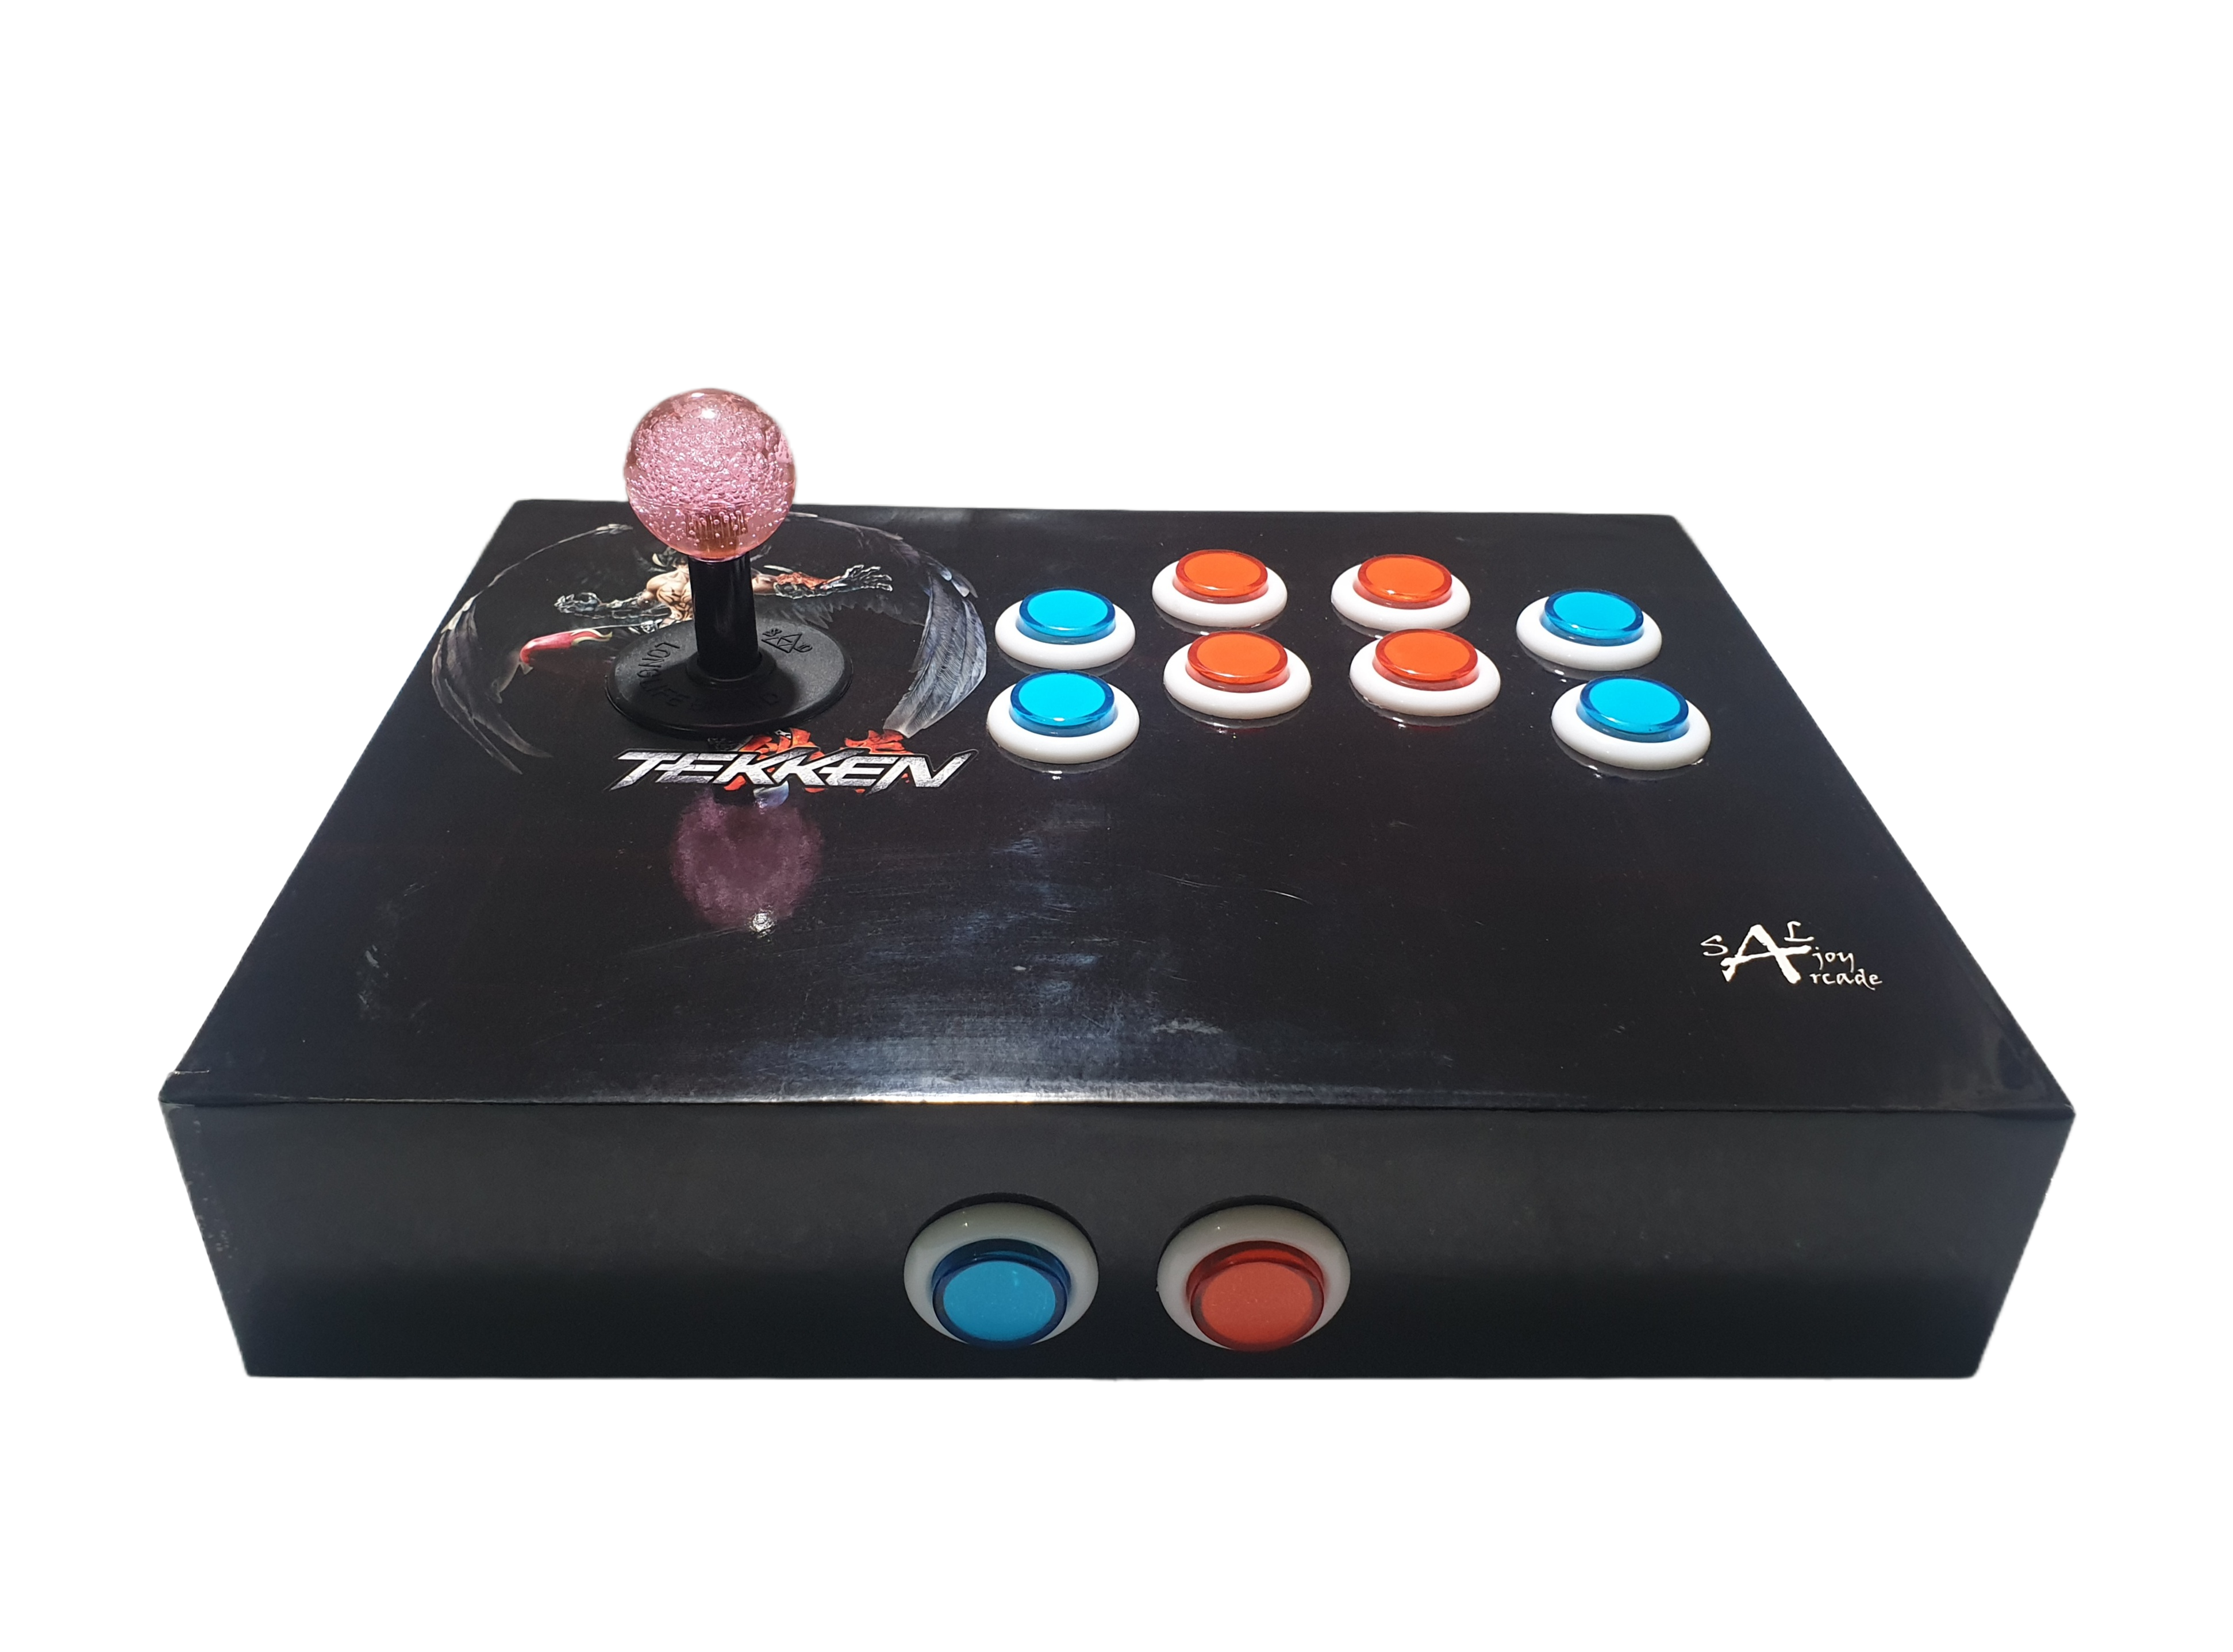 Xbox360 USB Arcade joystick for Xbox 360, PC Windows and Android Mobiles